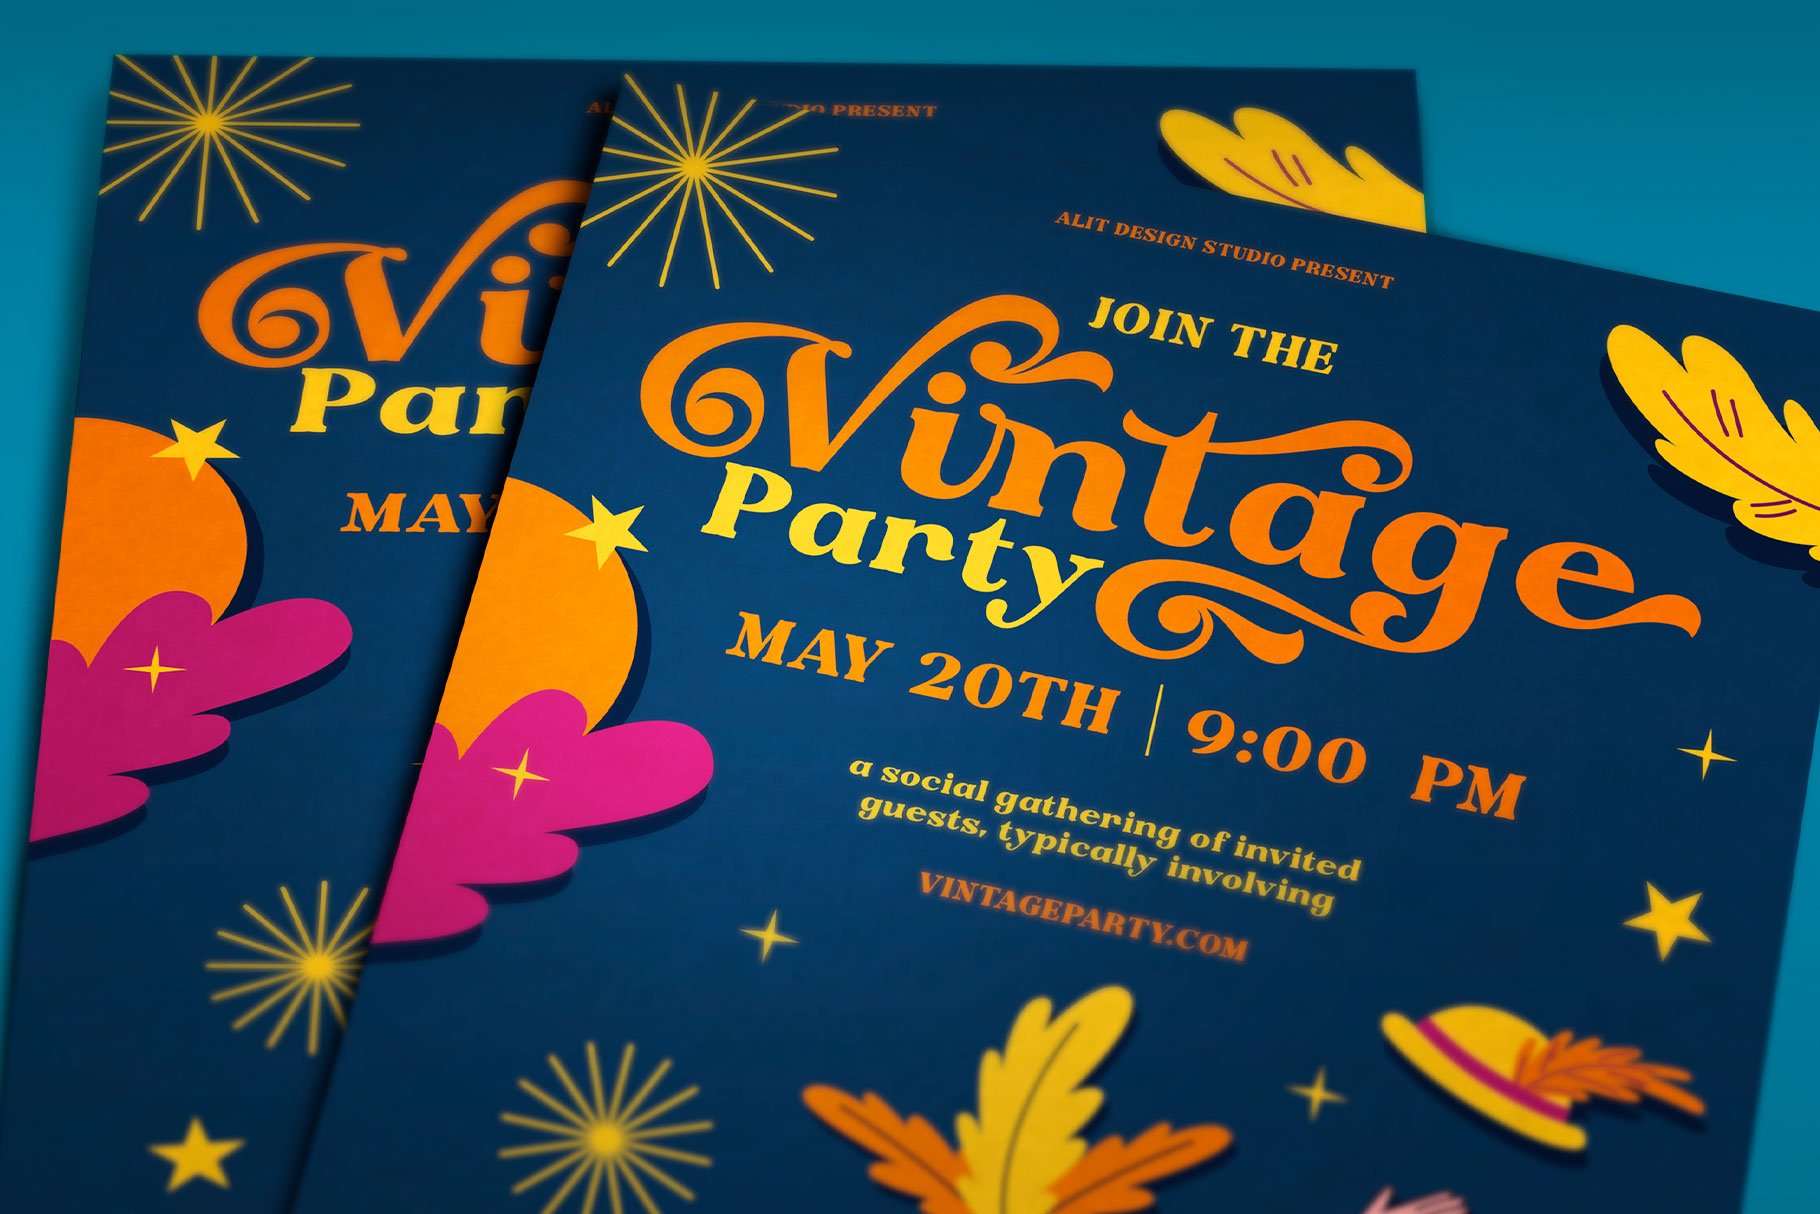 A pair of flyers for a vintage party.